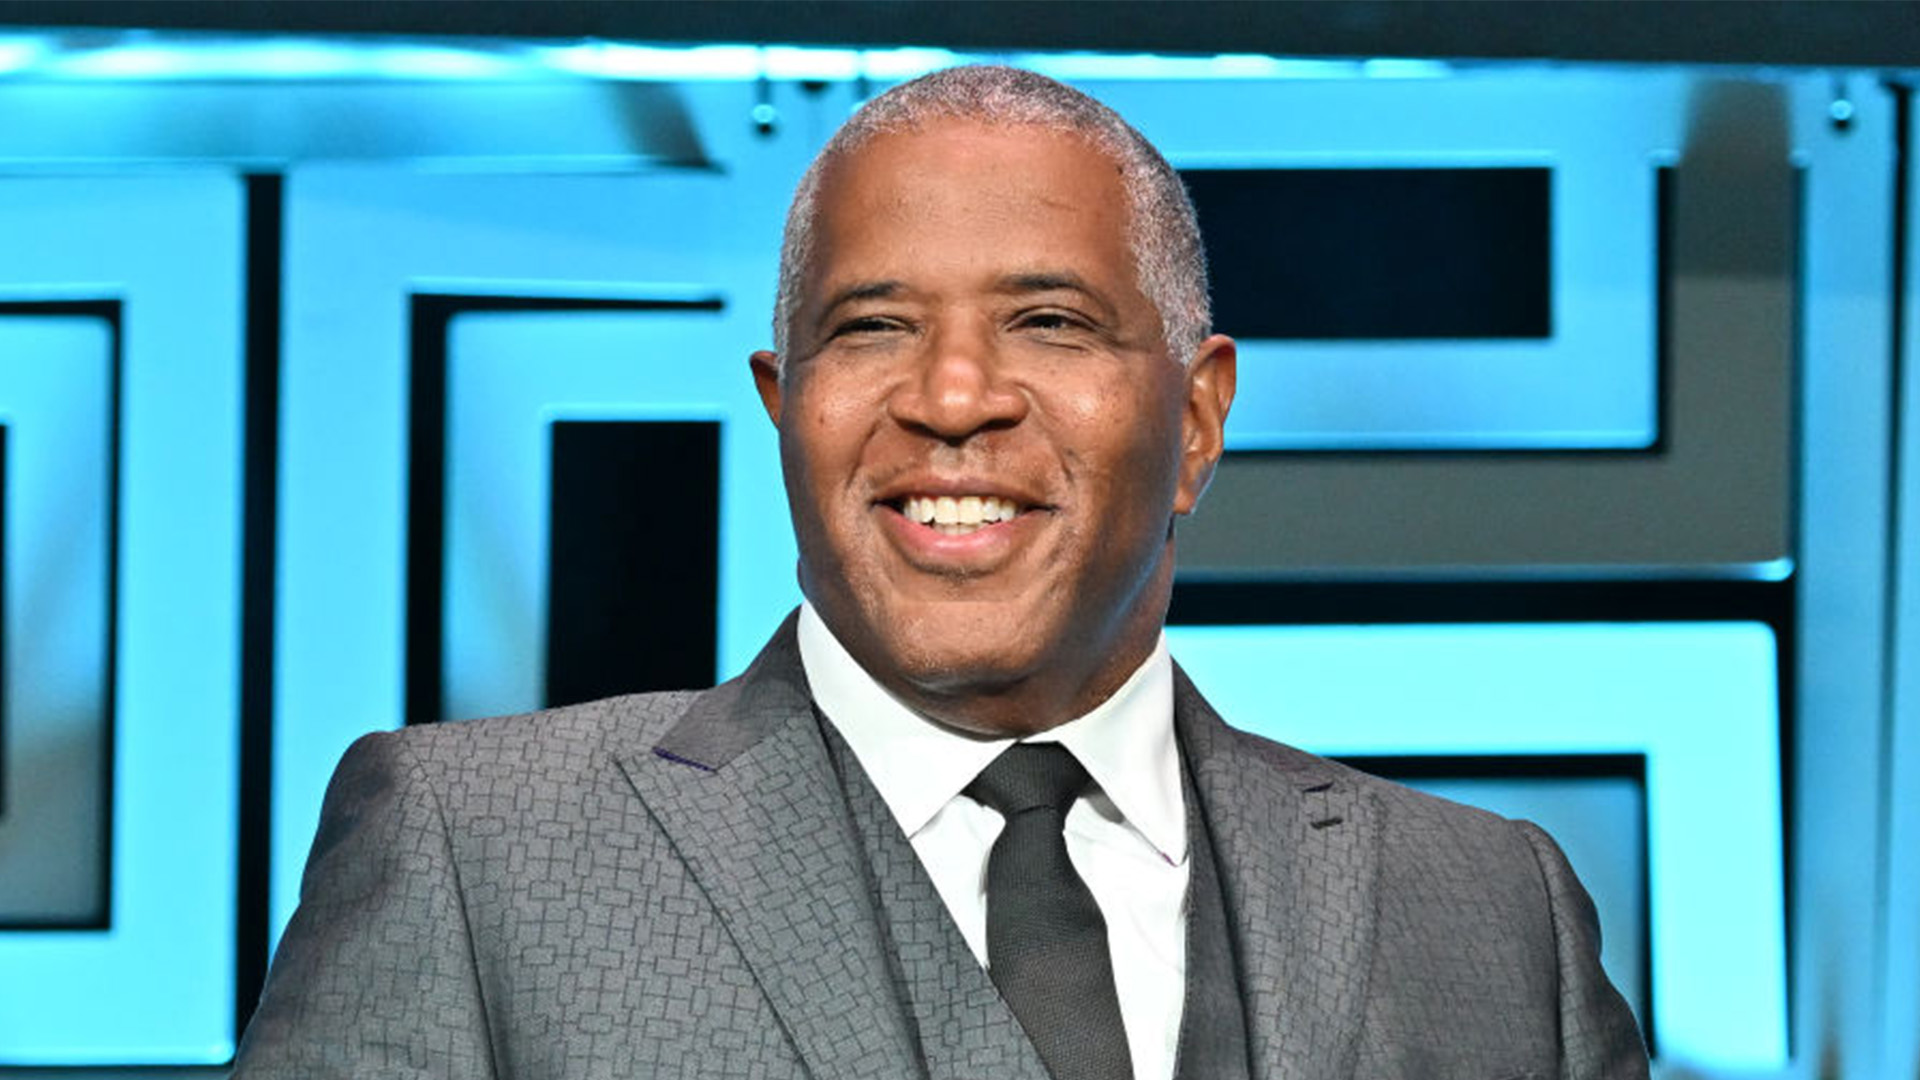 Robert F. Smith's Vista Equity Partners Raises $20B In Its Largest Fund To Date